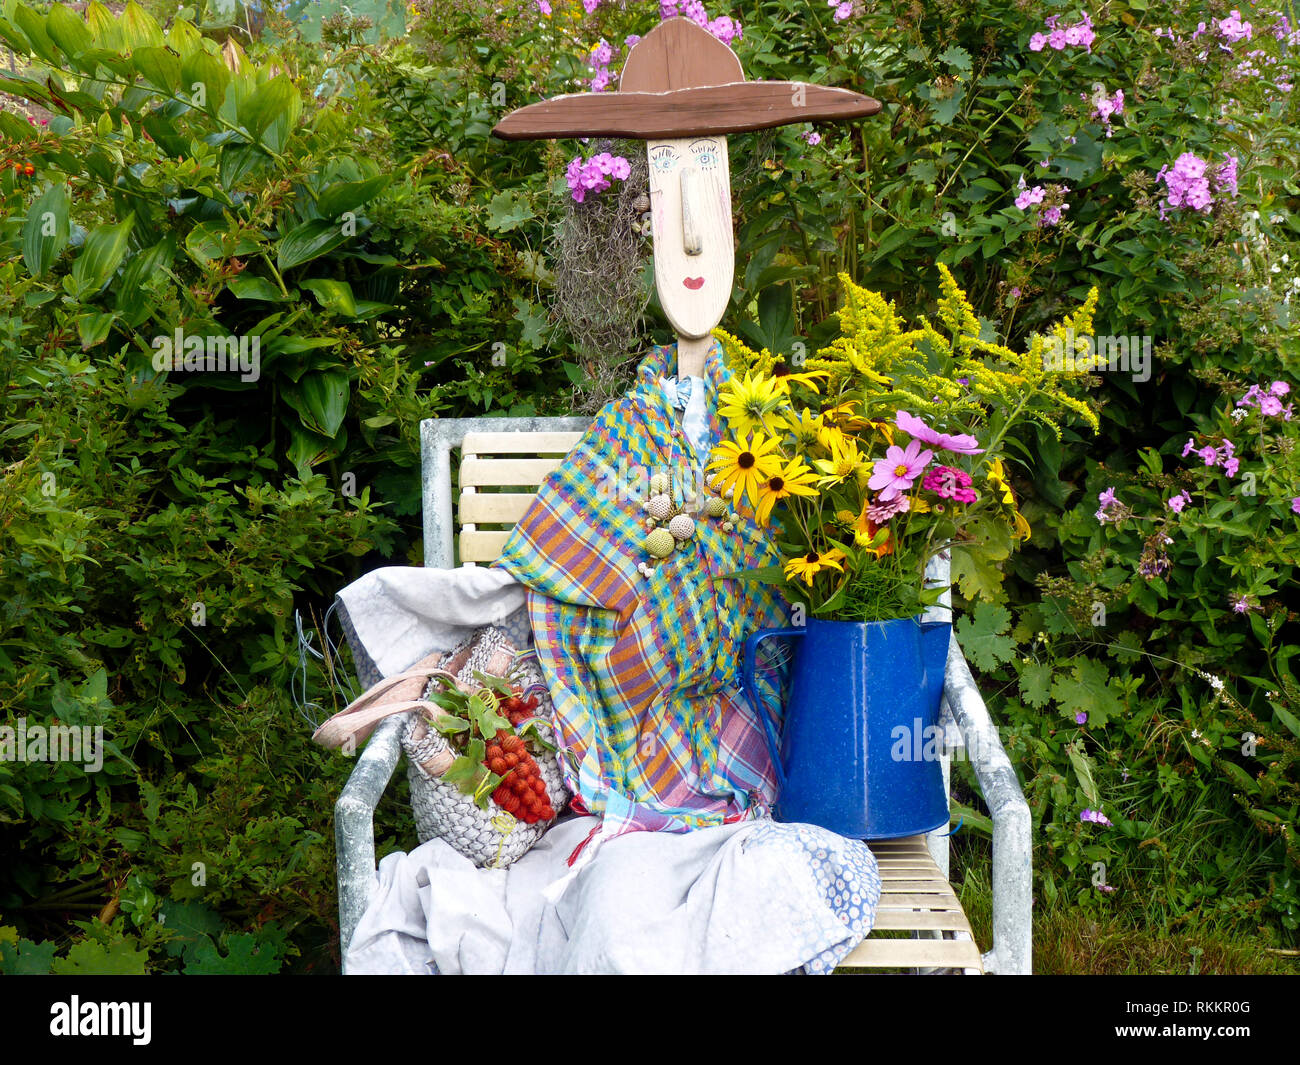 Garden statue and scarecrow dressed up with a bountiful fresh harvest from the community garden, Maine, USA Stock Photo